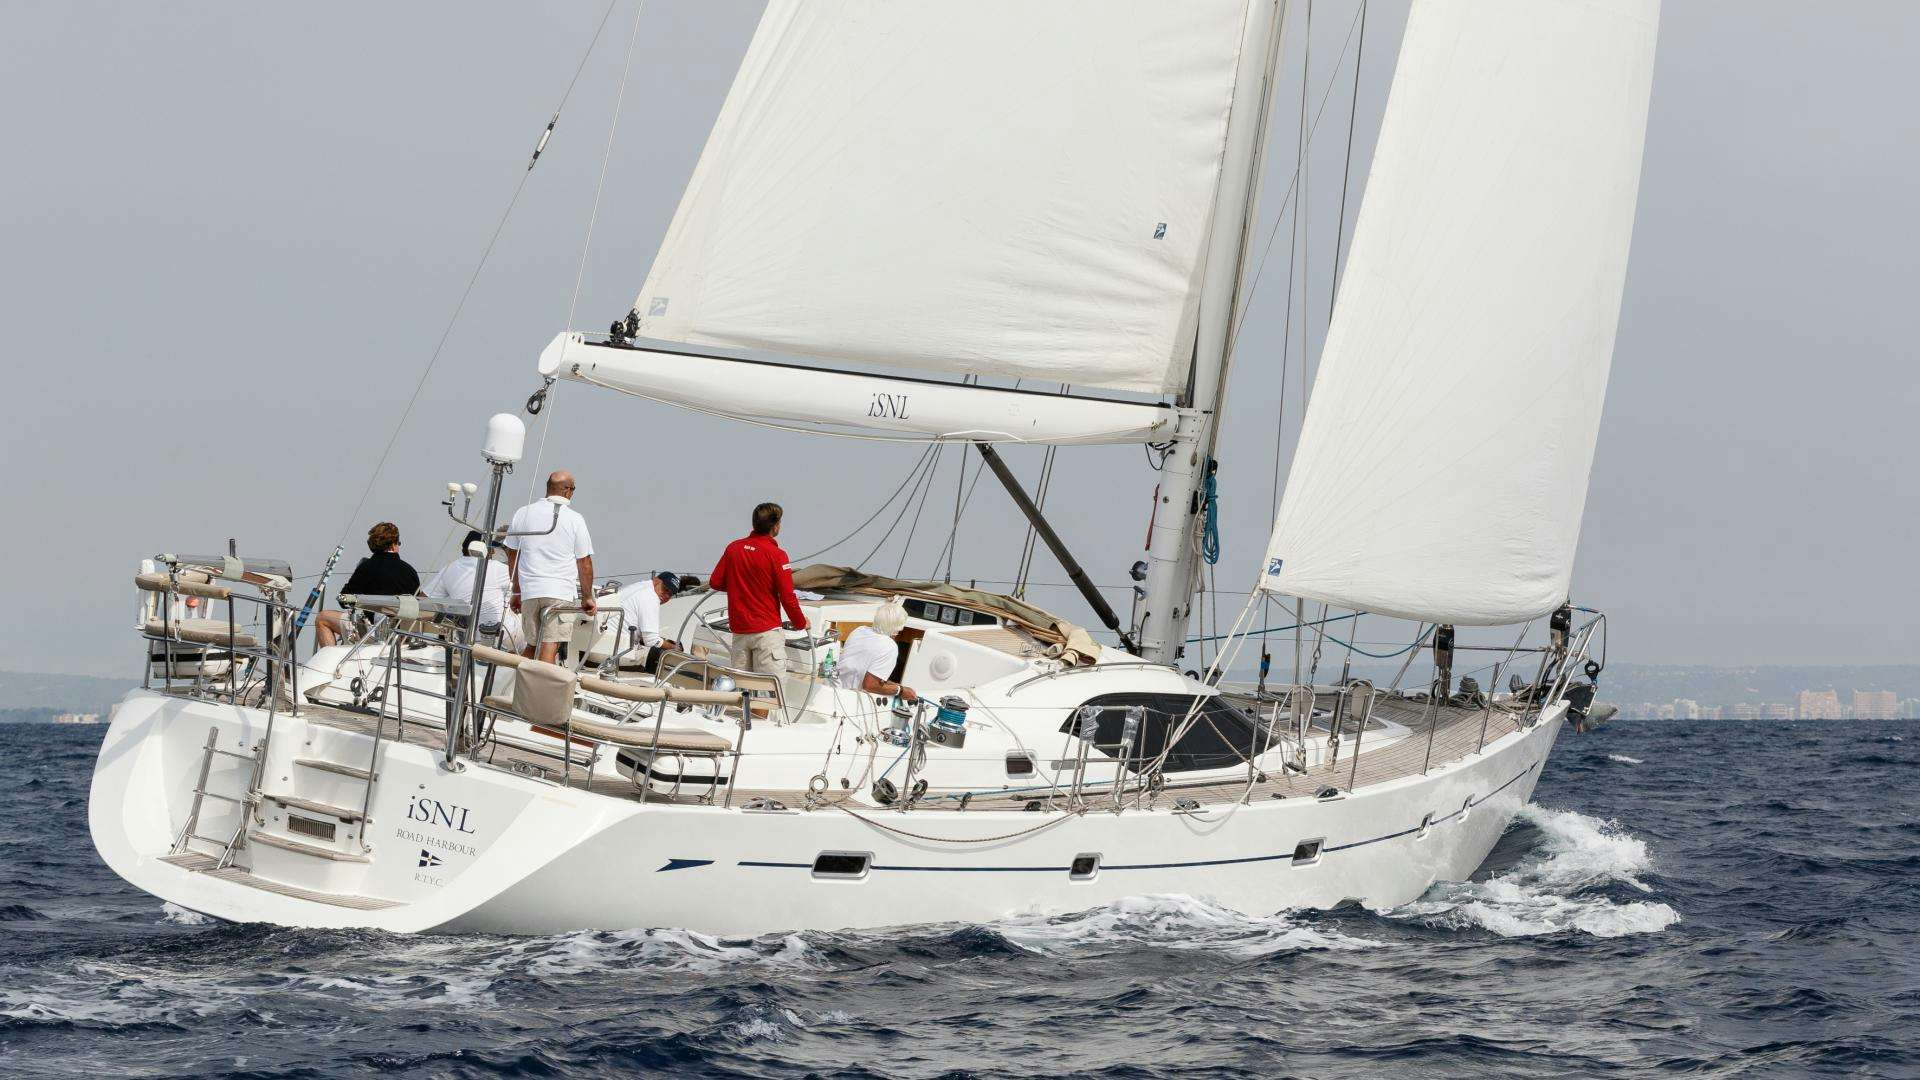 Watch Video for isnl Yacht for Sale